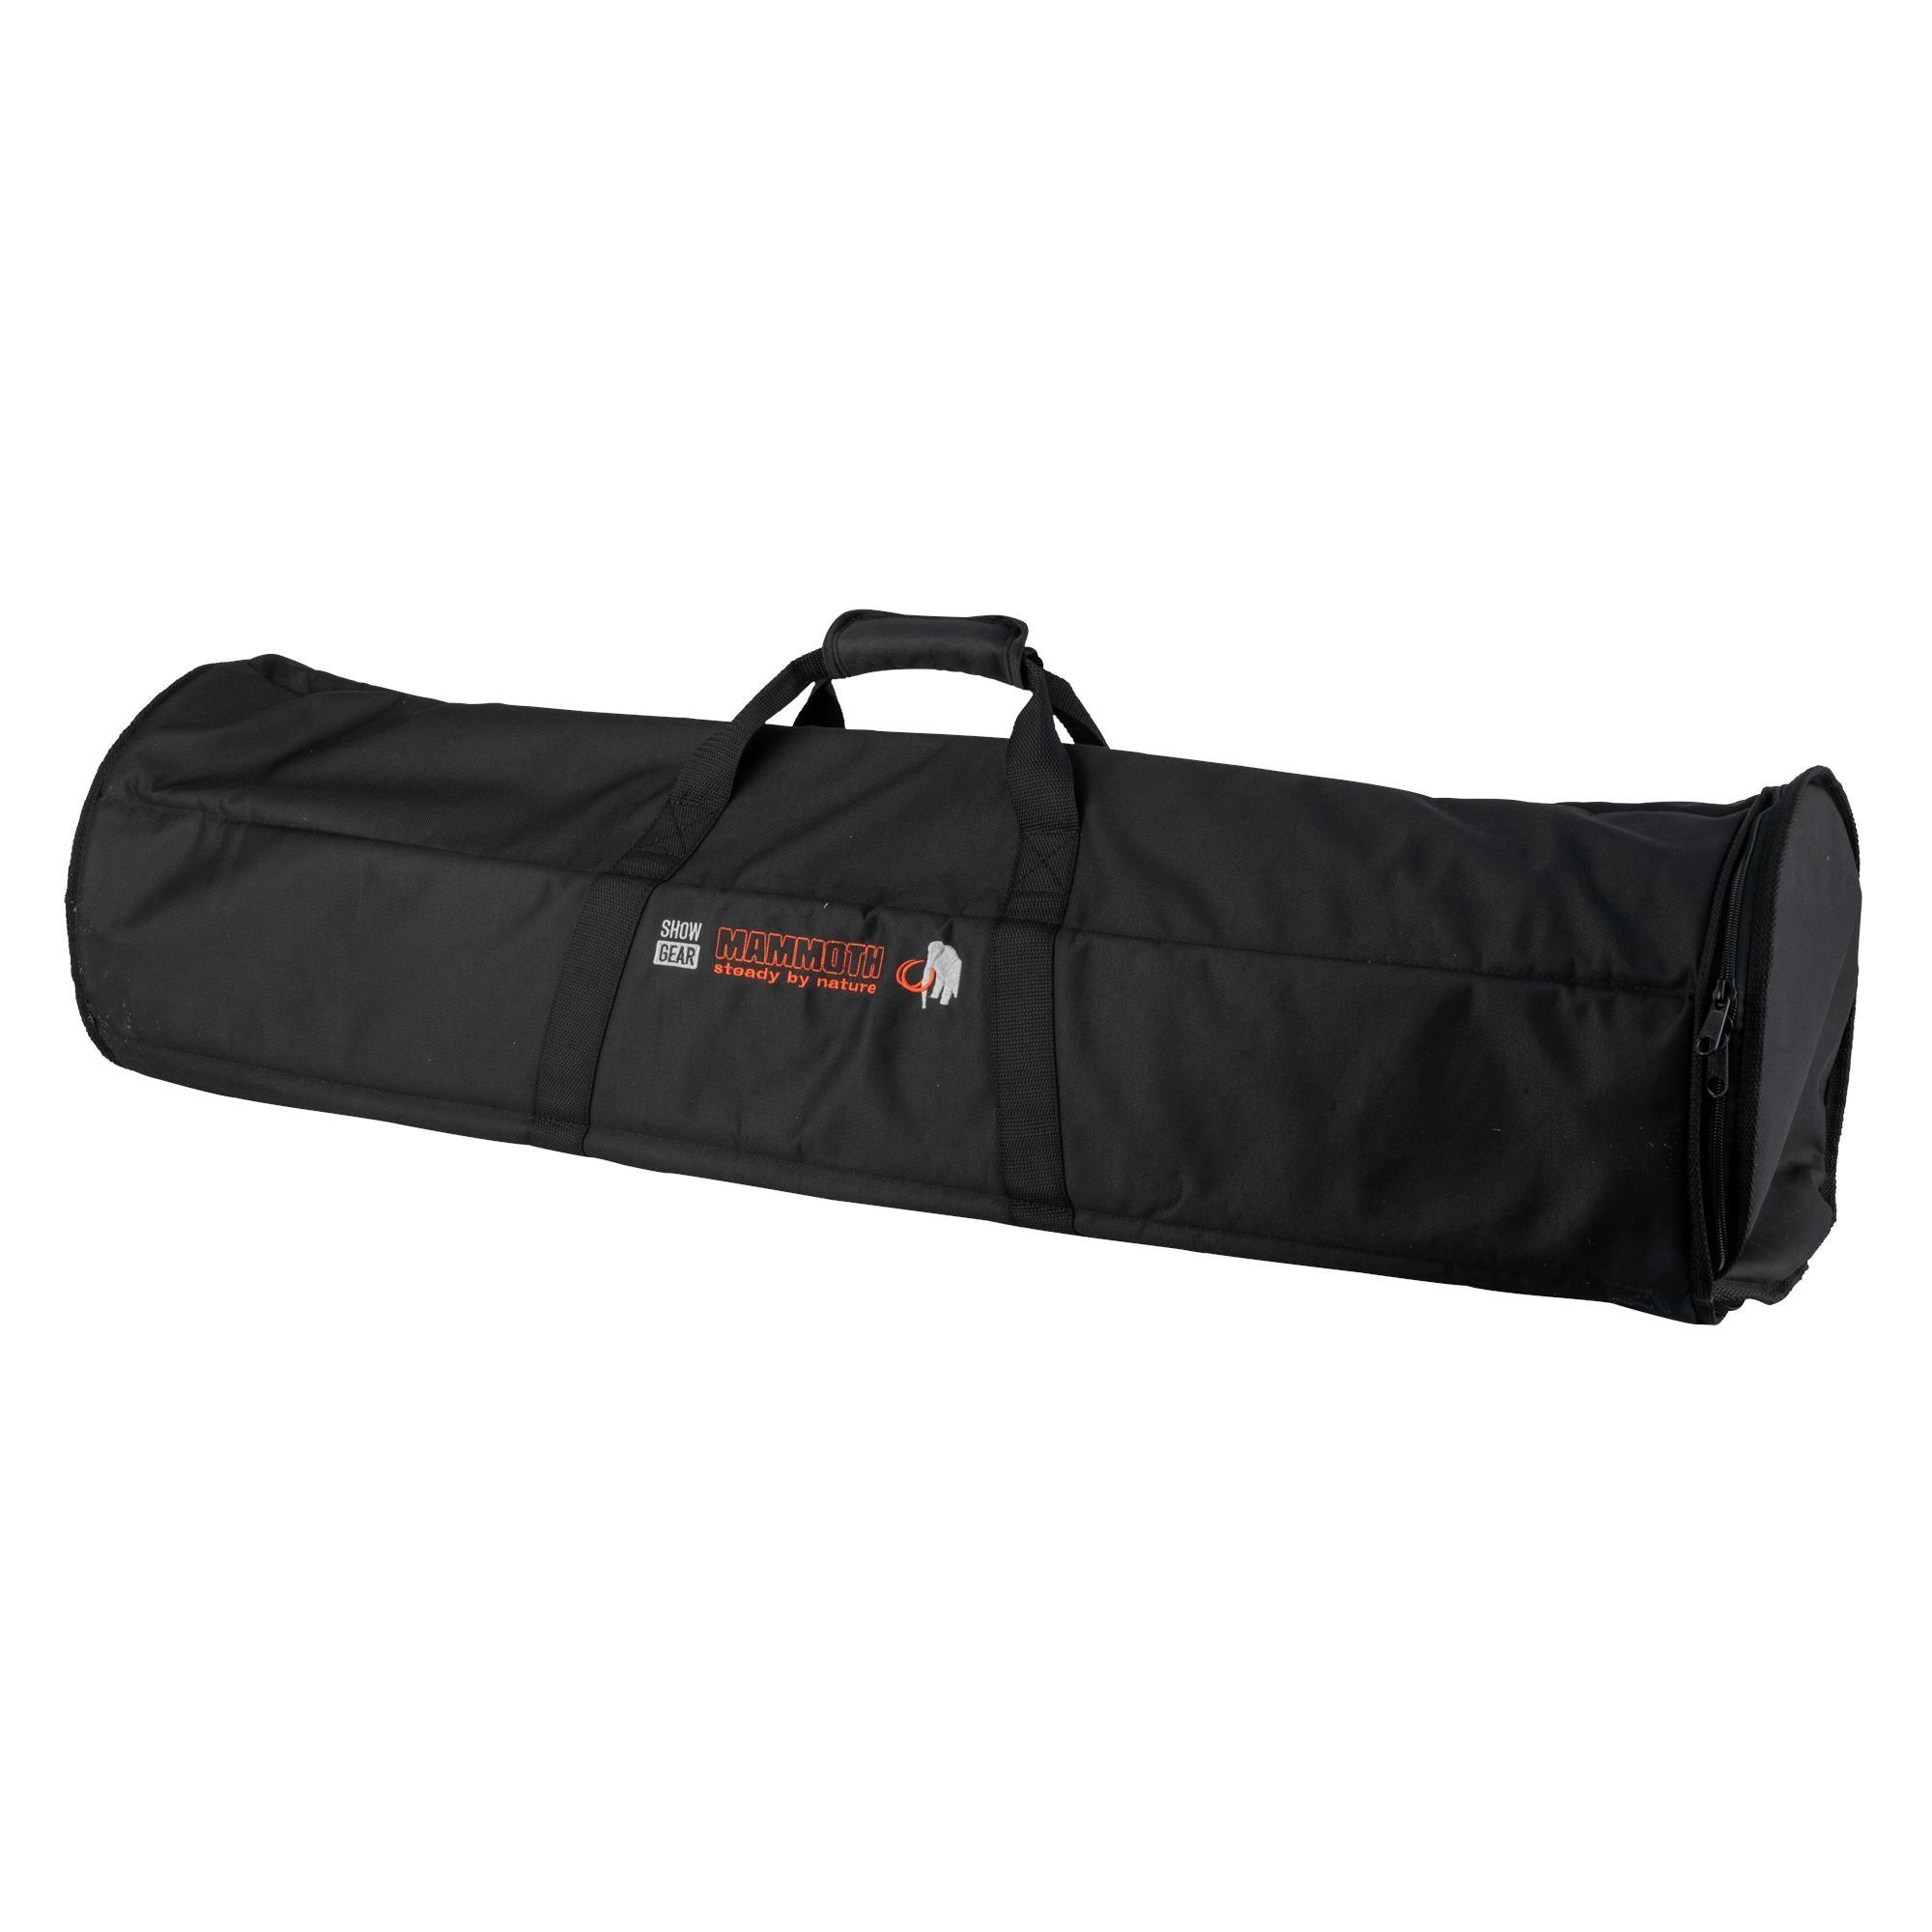 Showgear Transport Bag for 6 Large Microphone Stands - DY Pro Audio